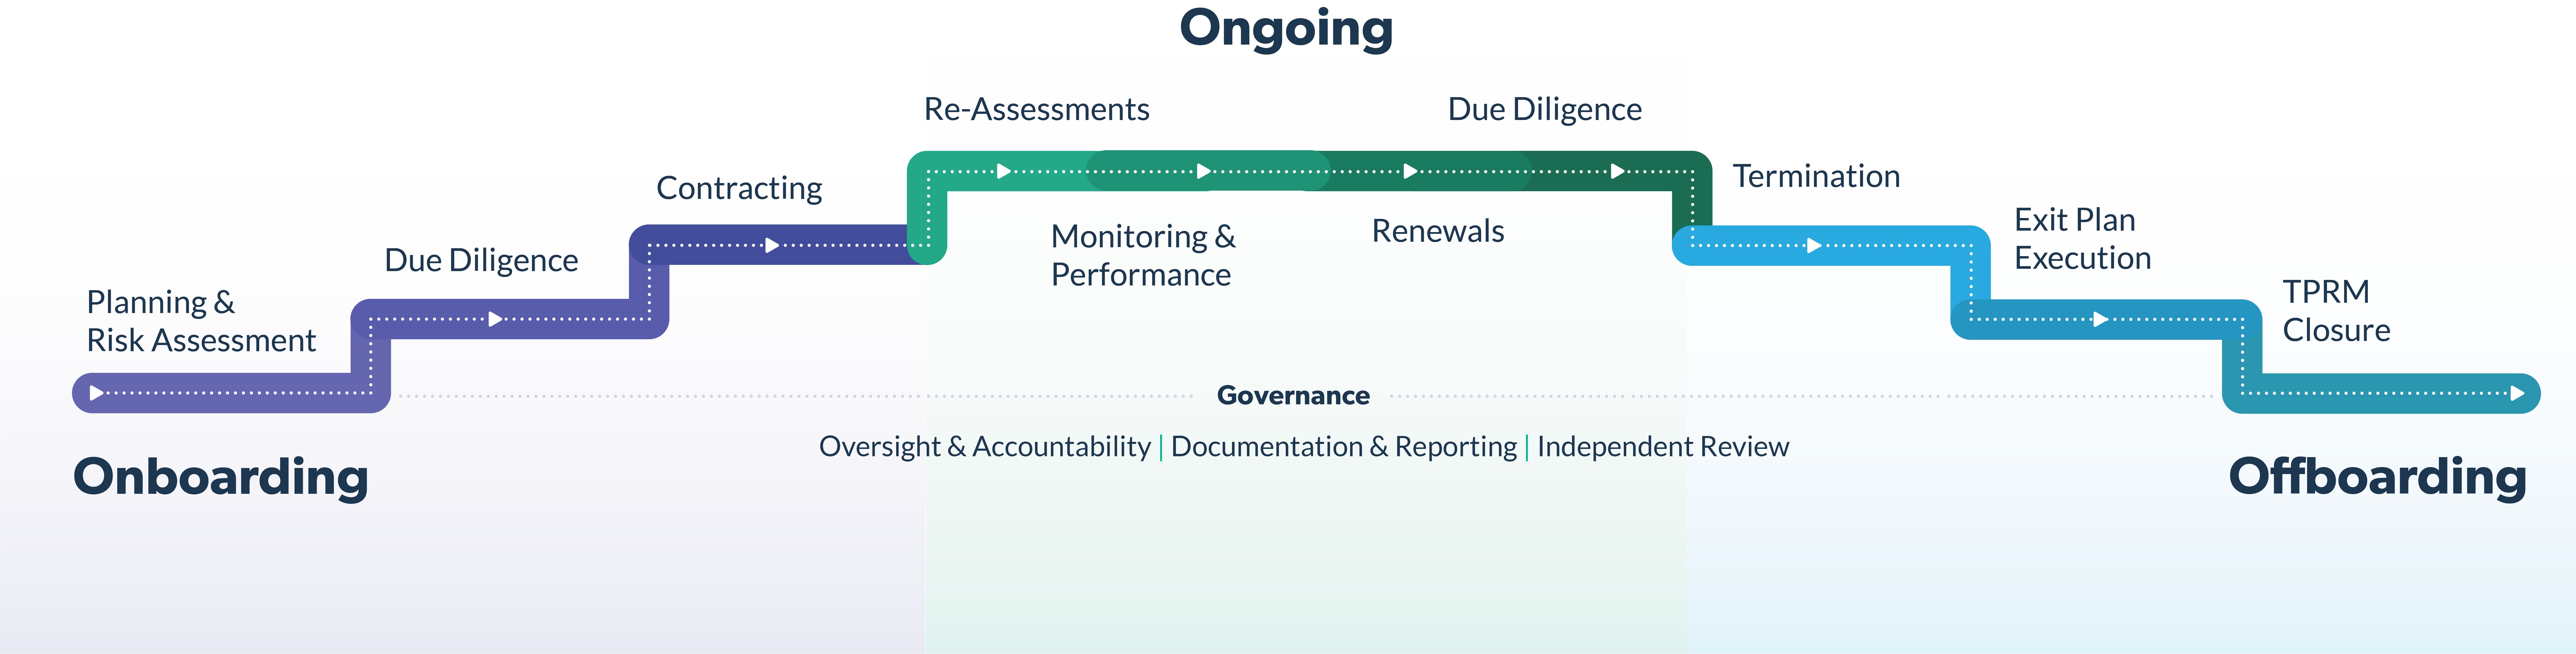 04.13.22-reinventing-the-third-party-risk-management-lifecycle-GRAPHIC-1